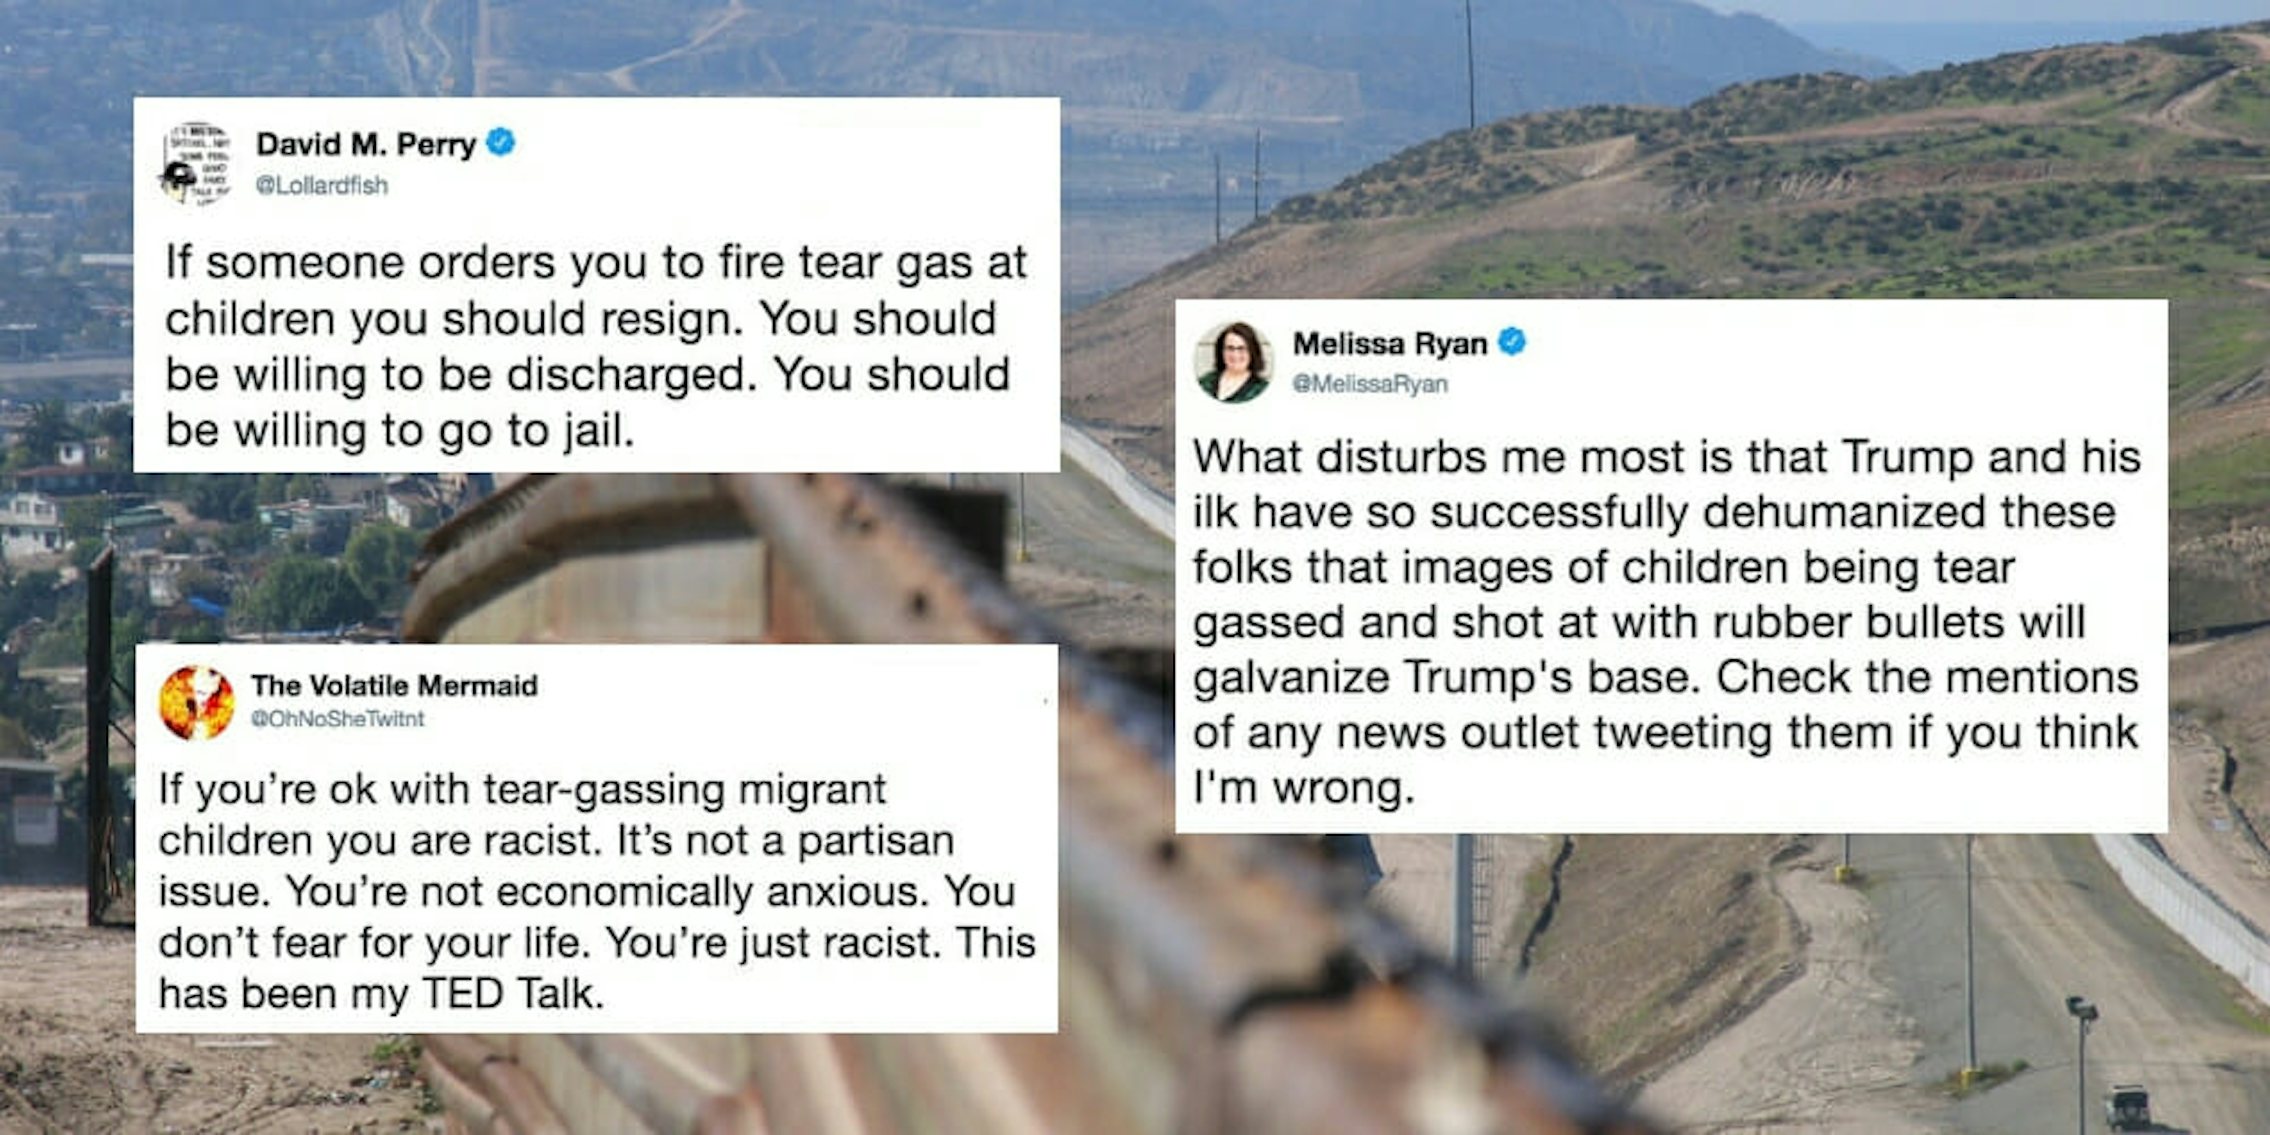 Tweets about the tear gassing of migrant children